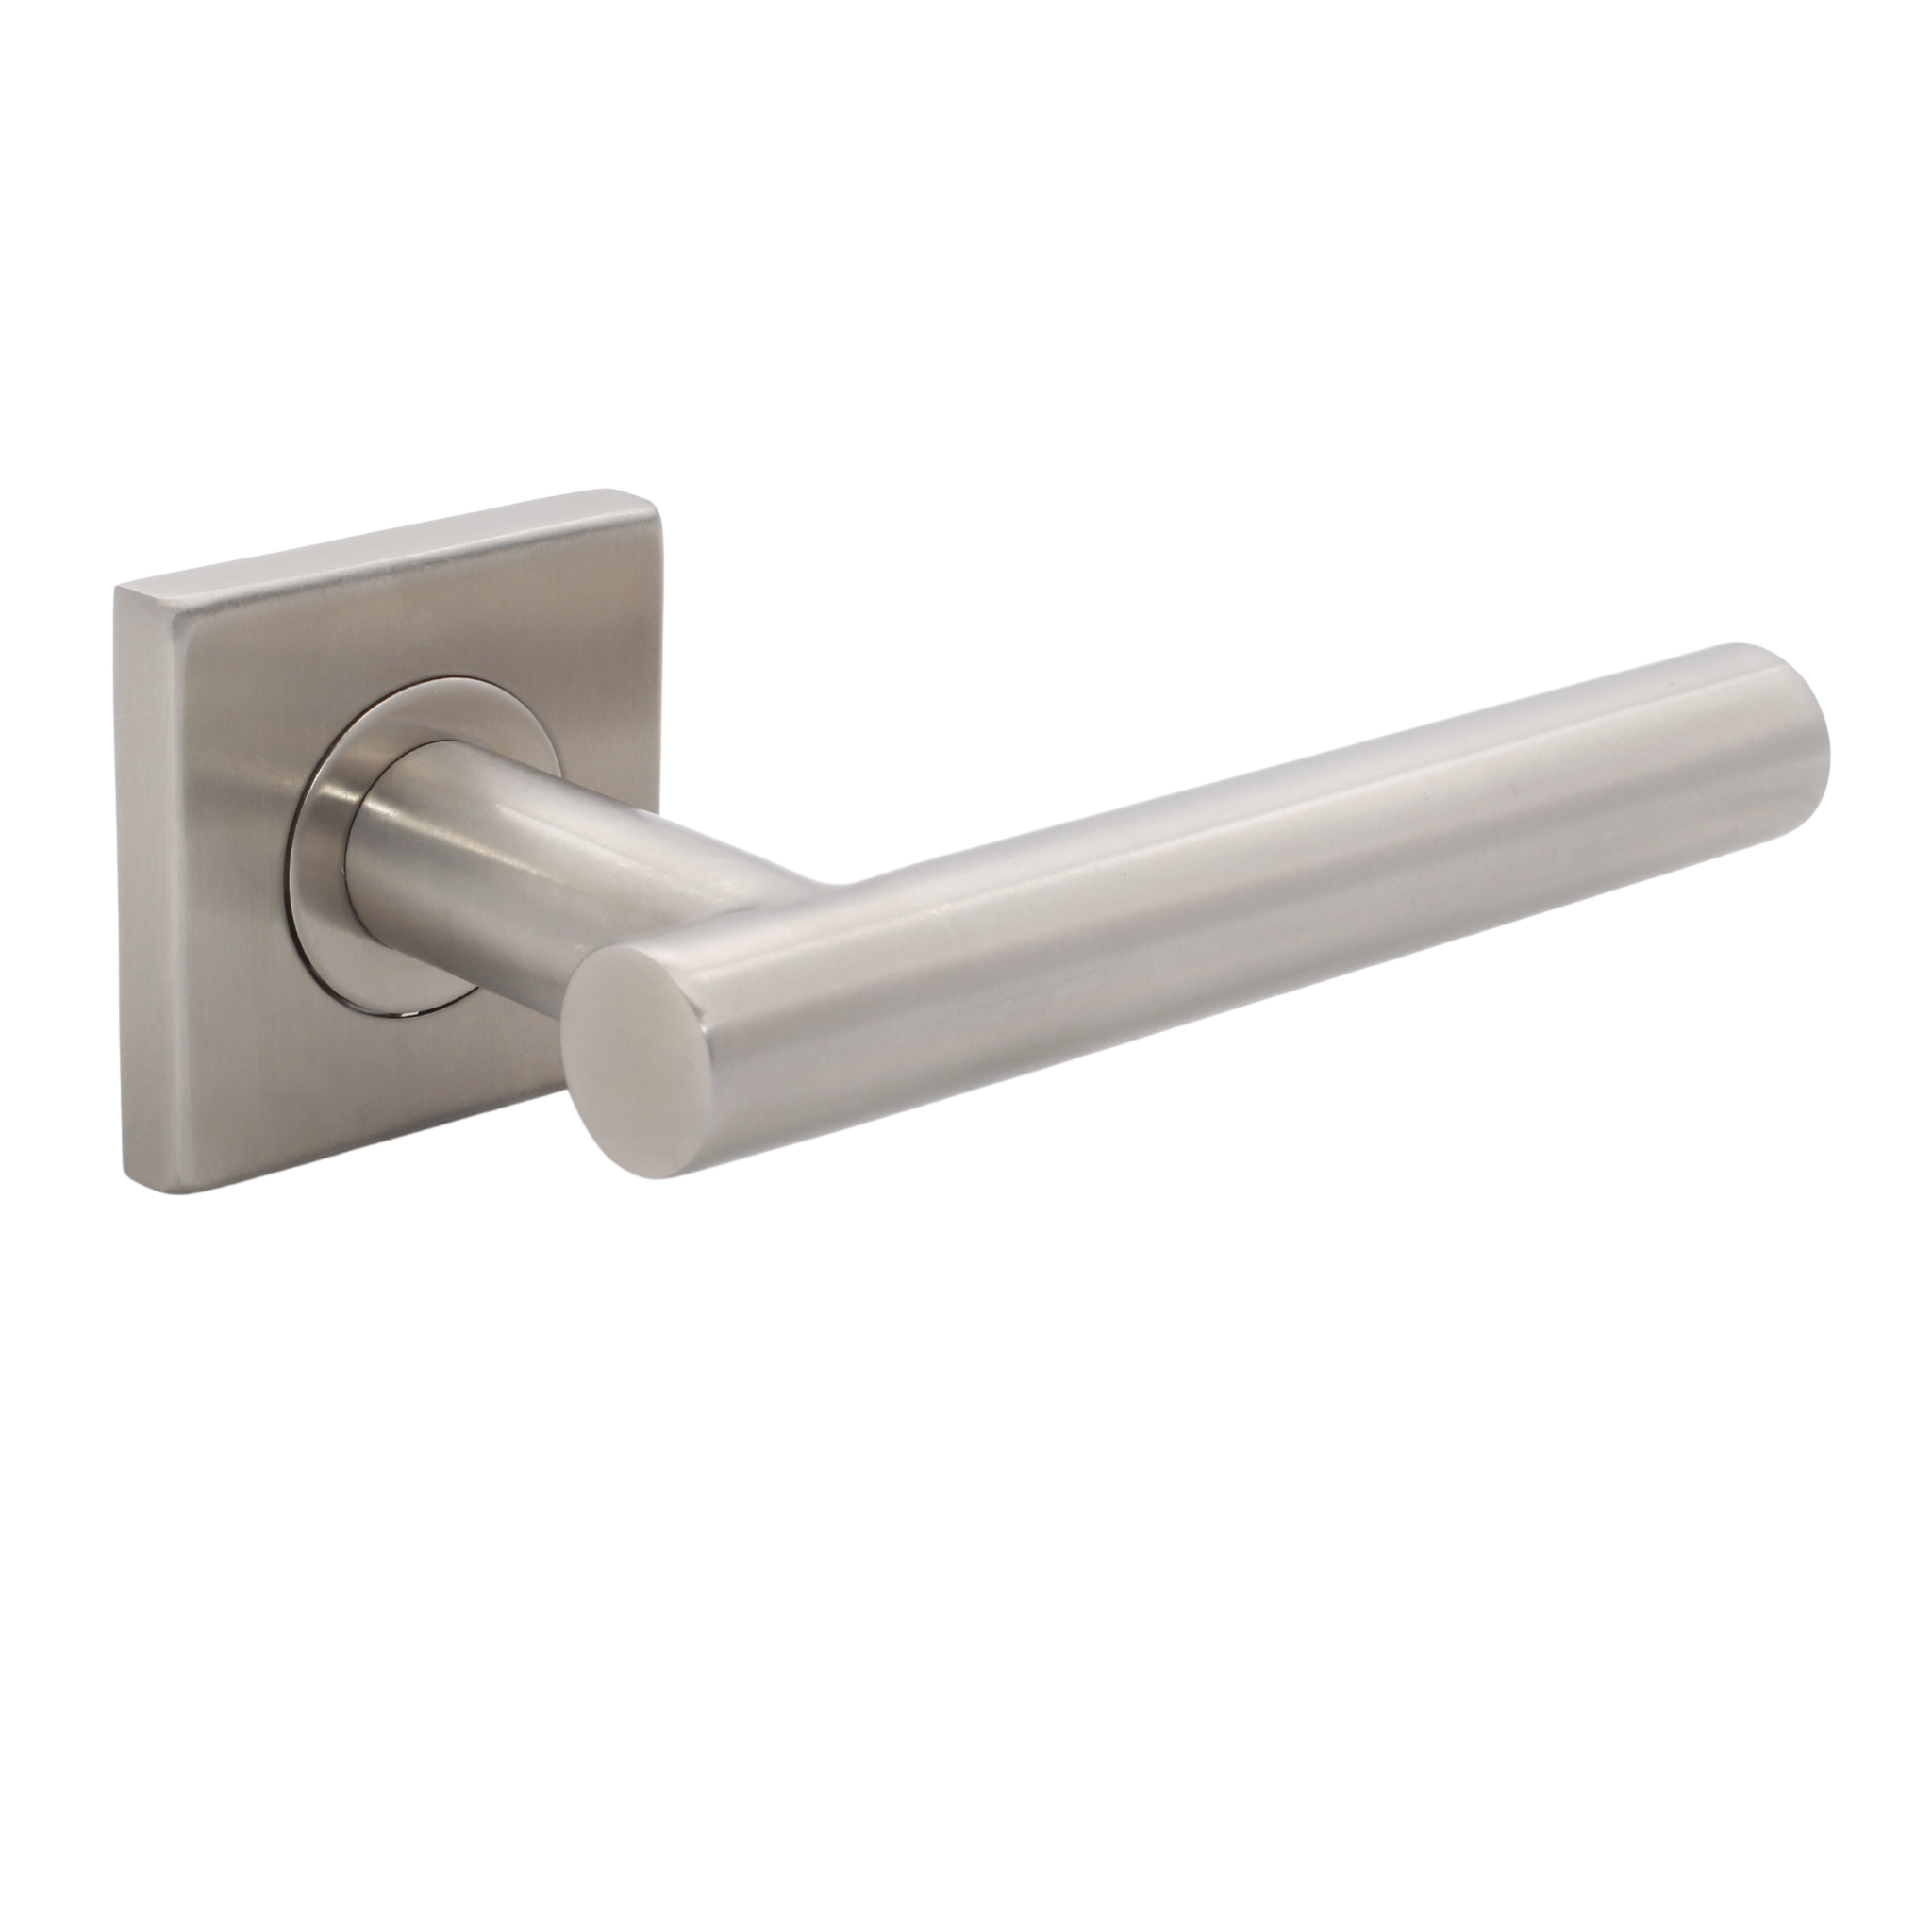 FT06.S._.TR, Lever Handles, Tubular, On Square Rose, With Escutcheons, 134mm (l), Stainless Steel with Tarnish Resistant, CISA